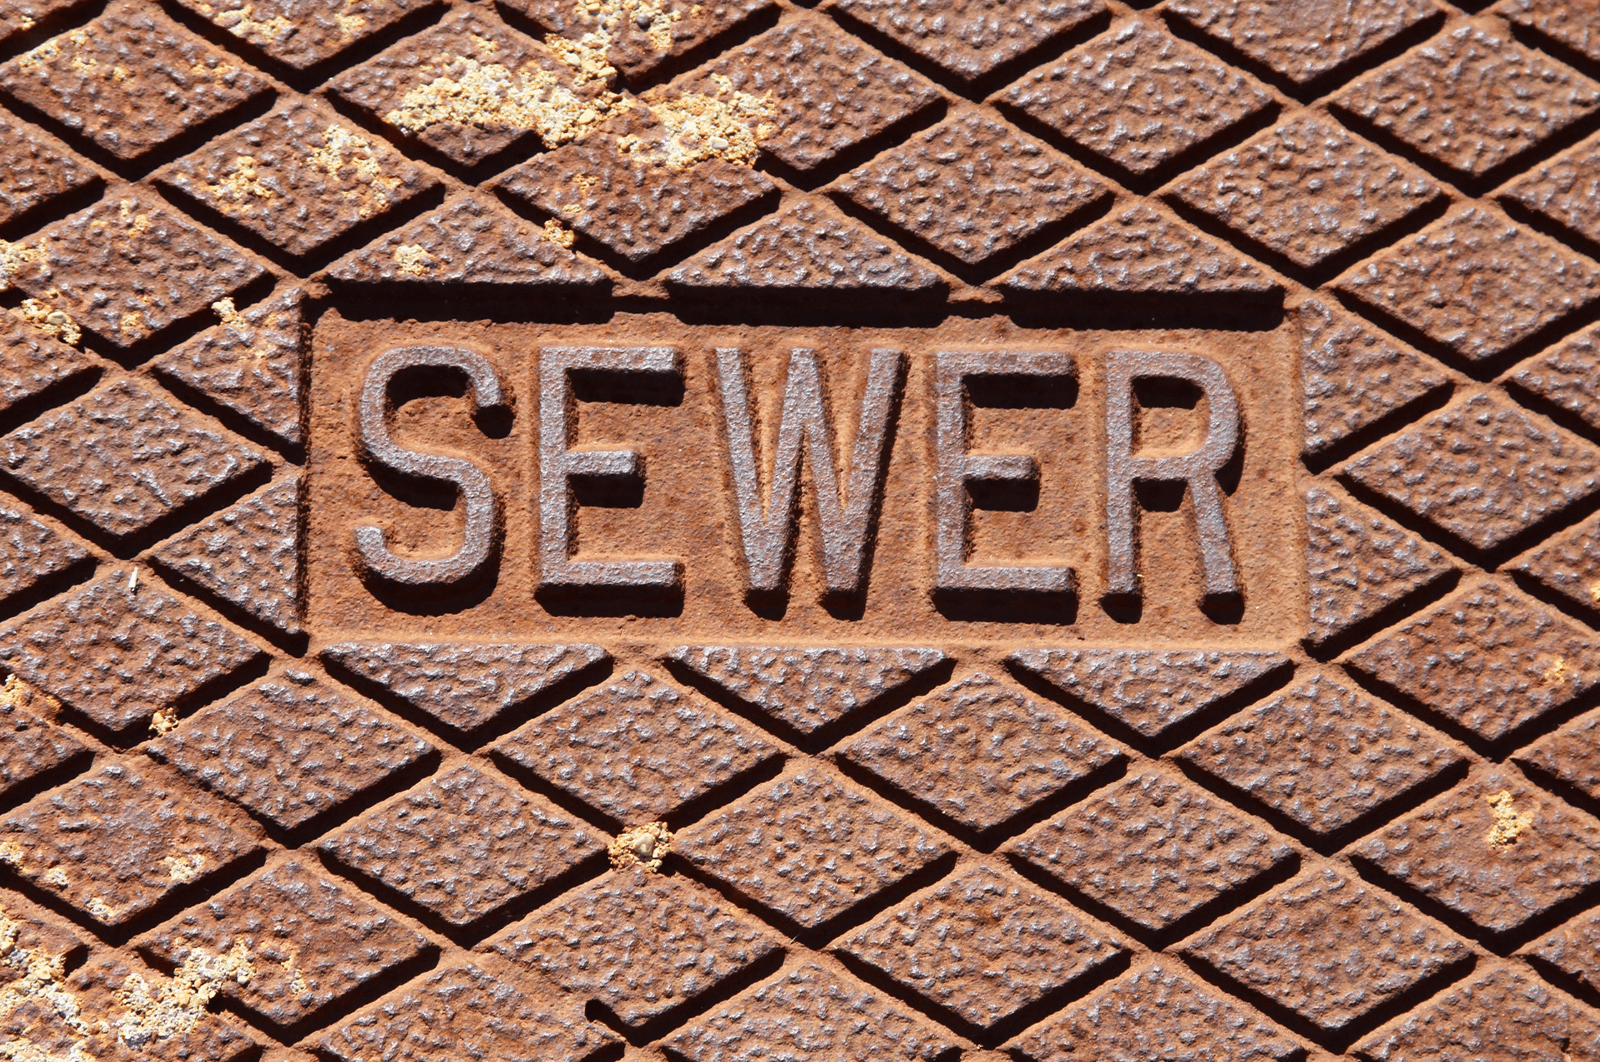 A sewer line cover